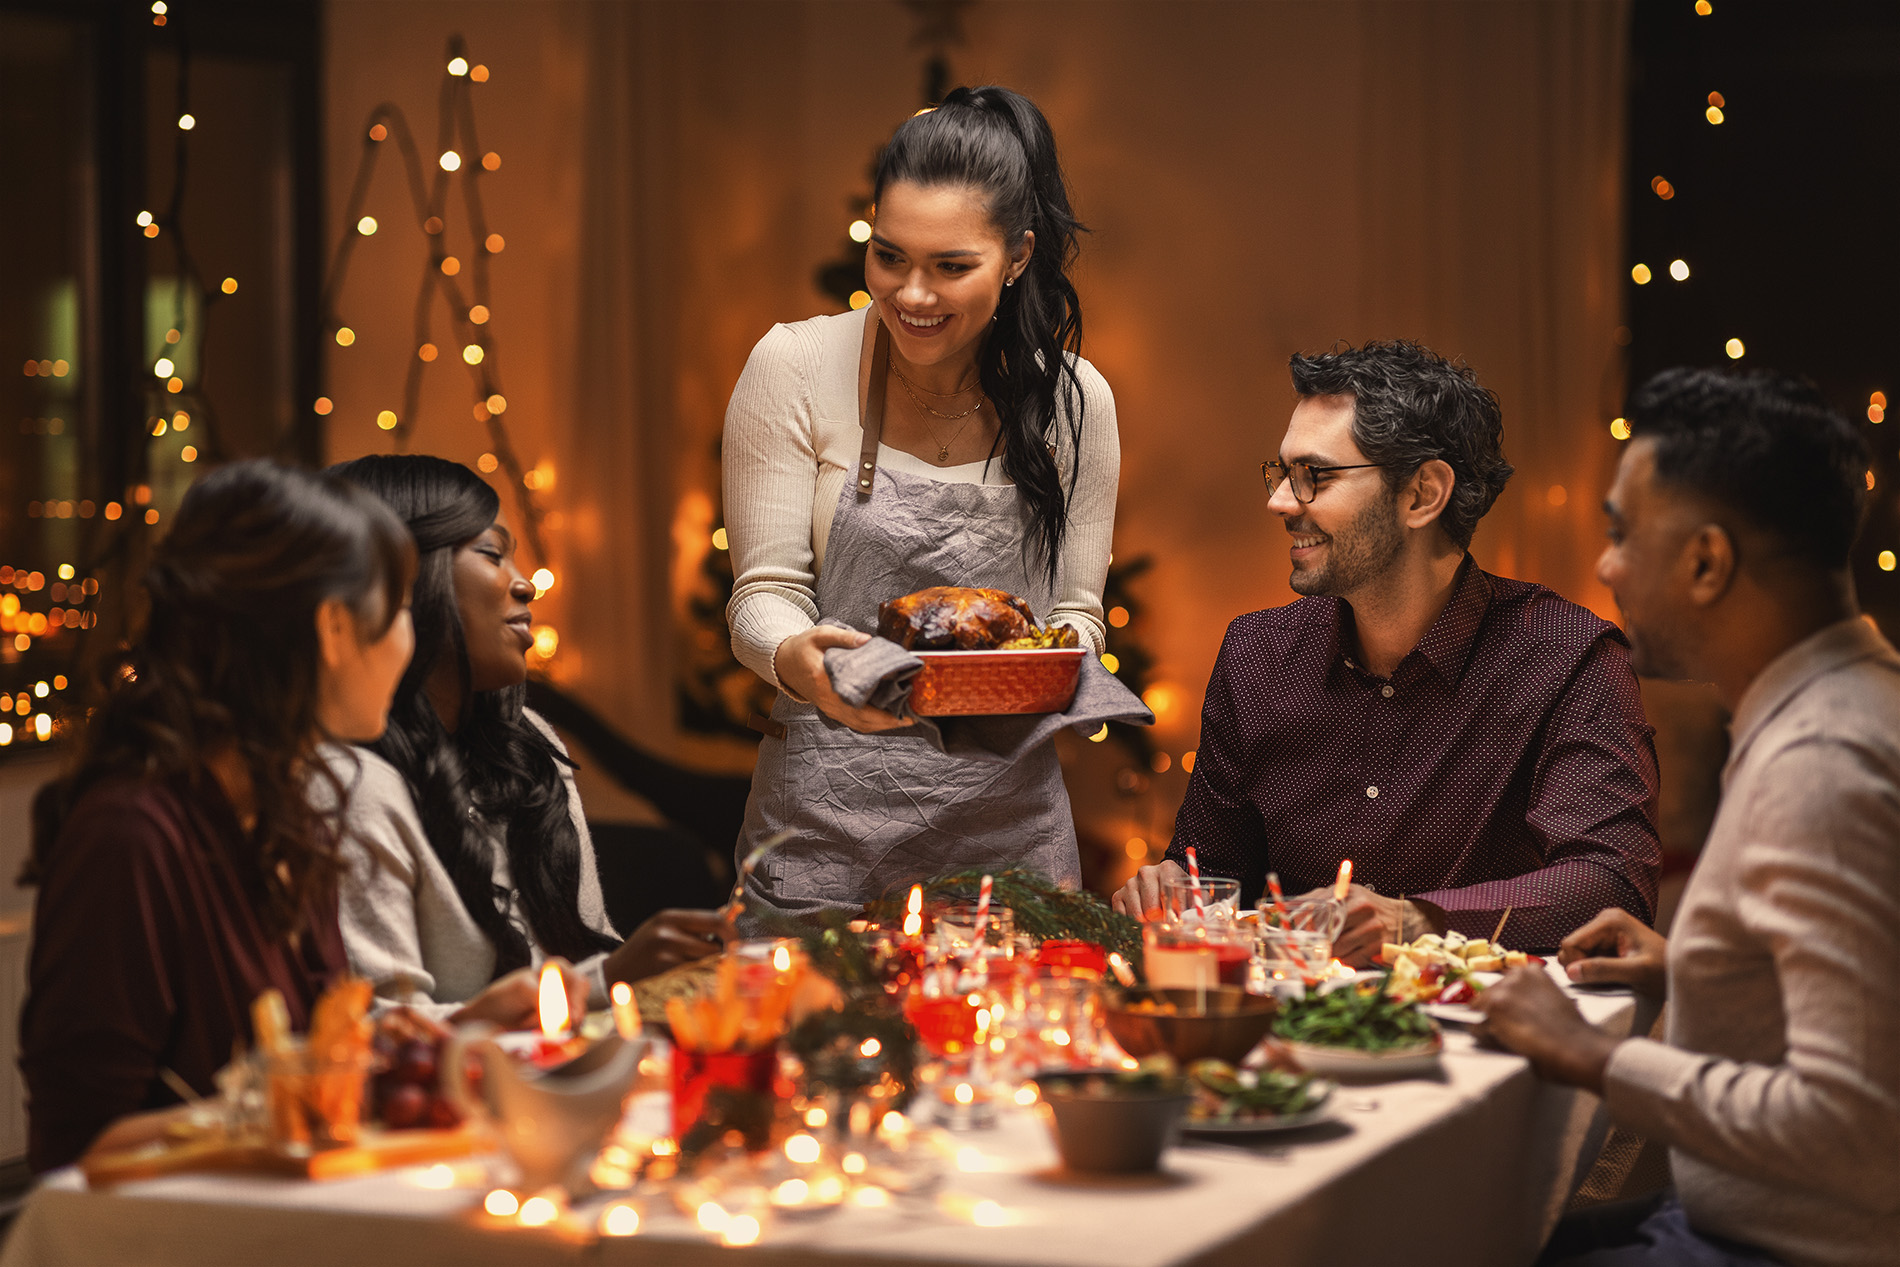 People sharing holiday meal